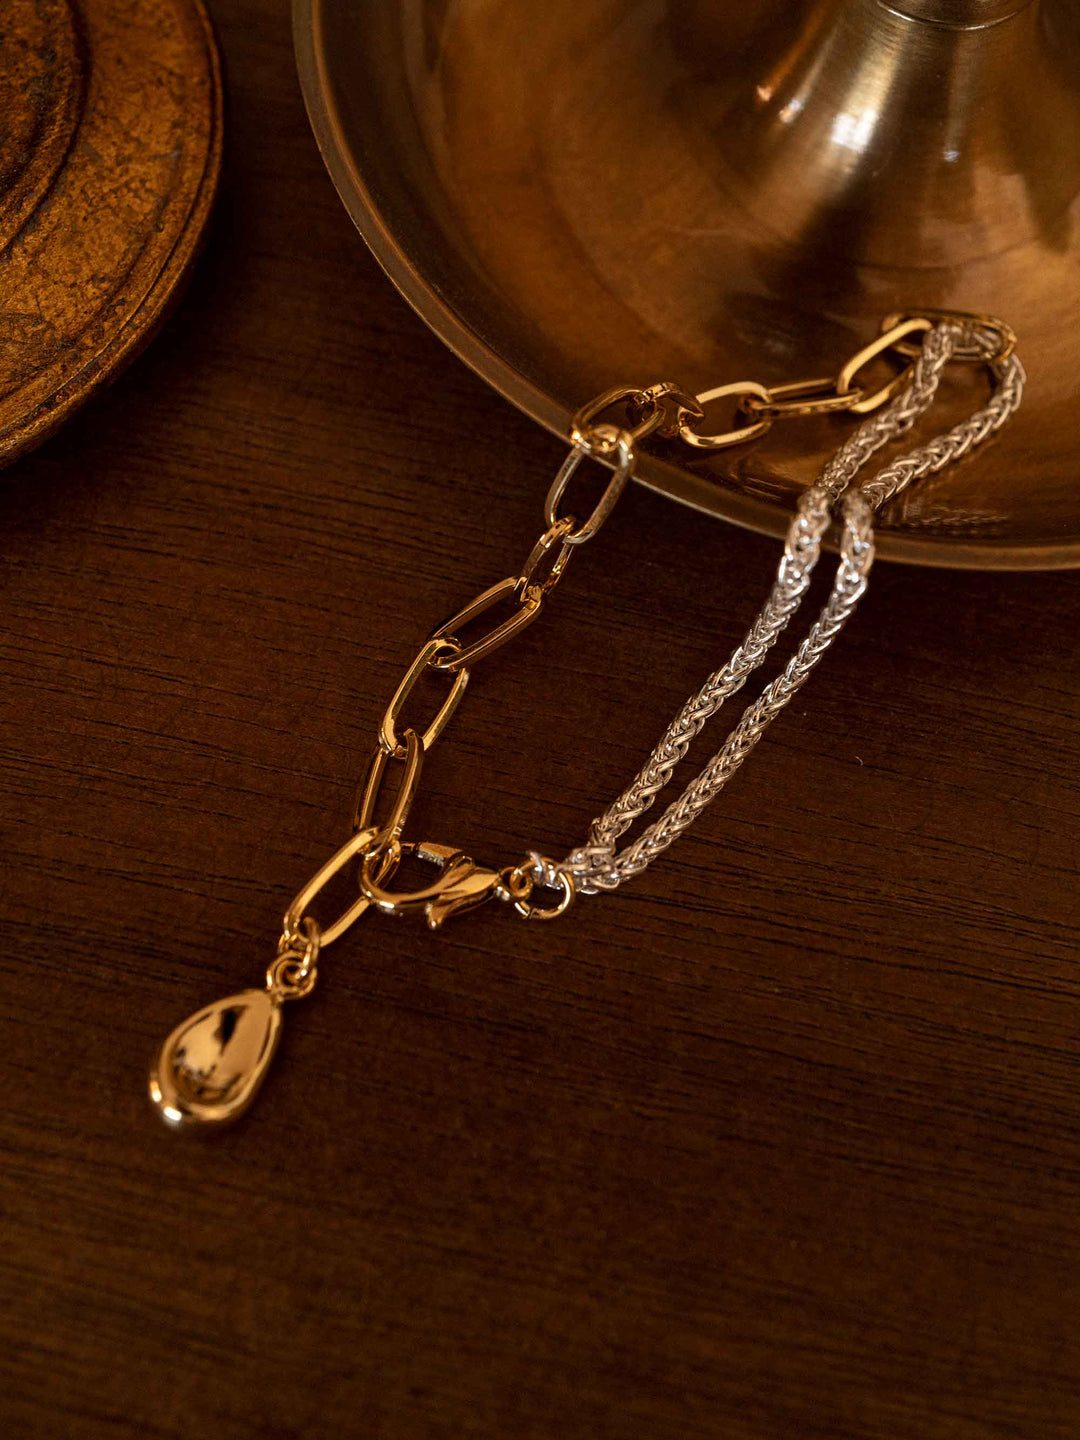 A gold and silver color matching bracelet